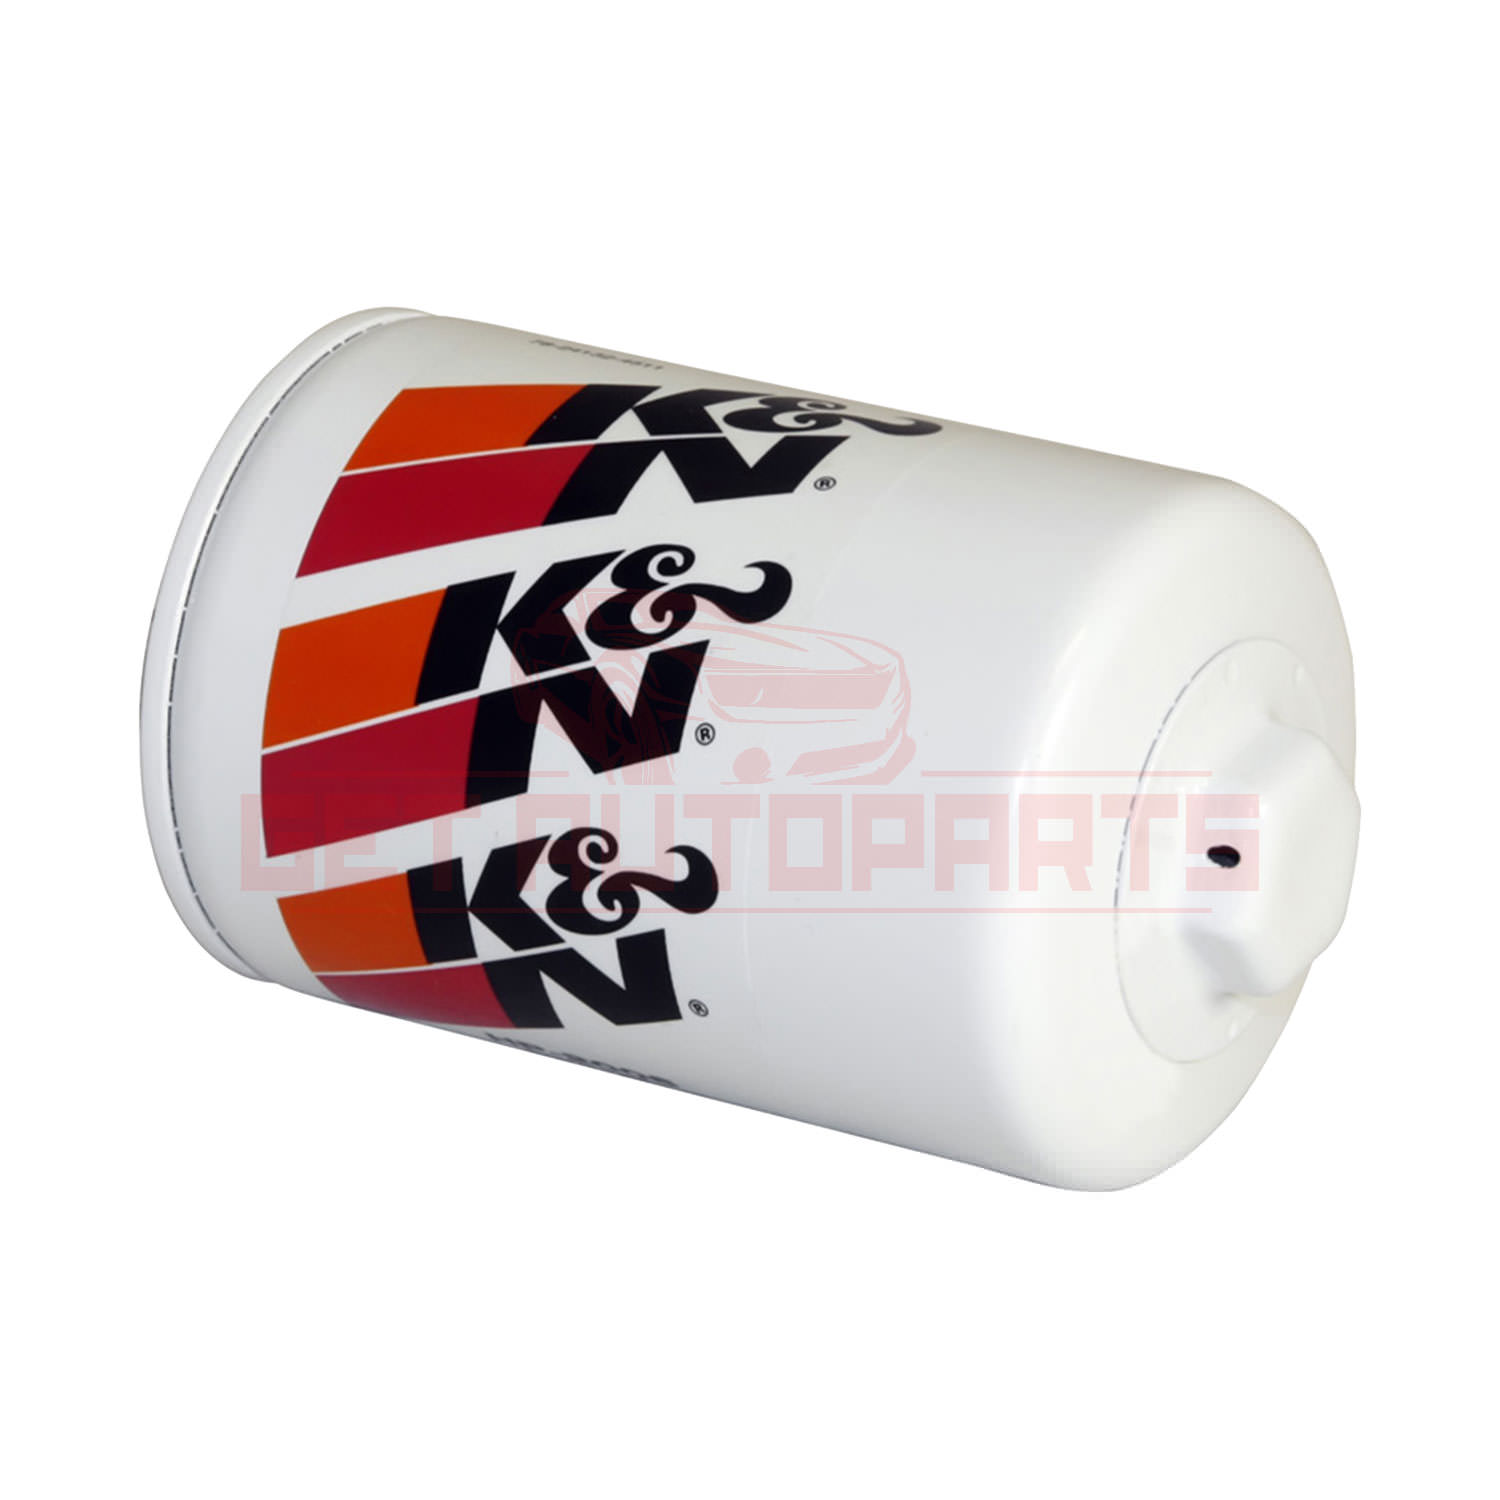 K&N Oil Filter fit GMC Canyon 2004-2012